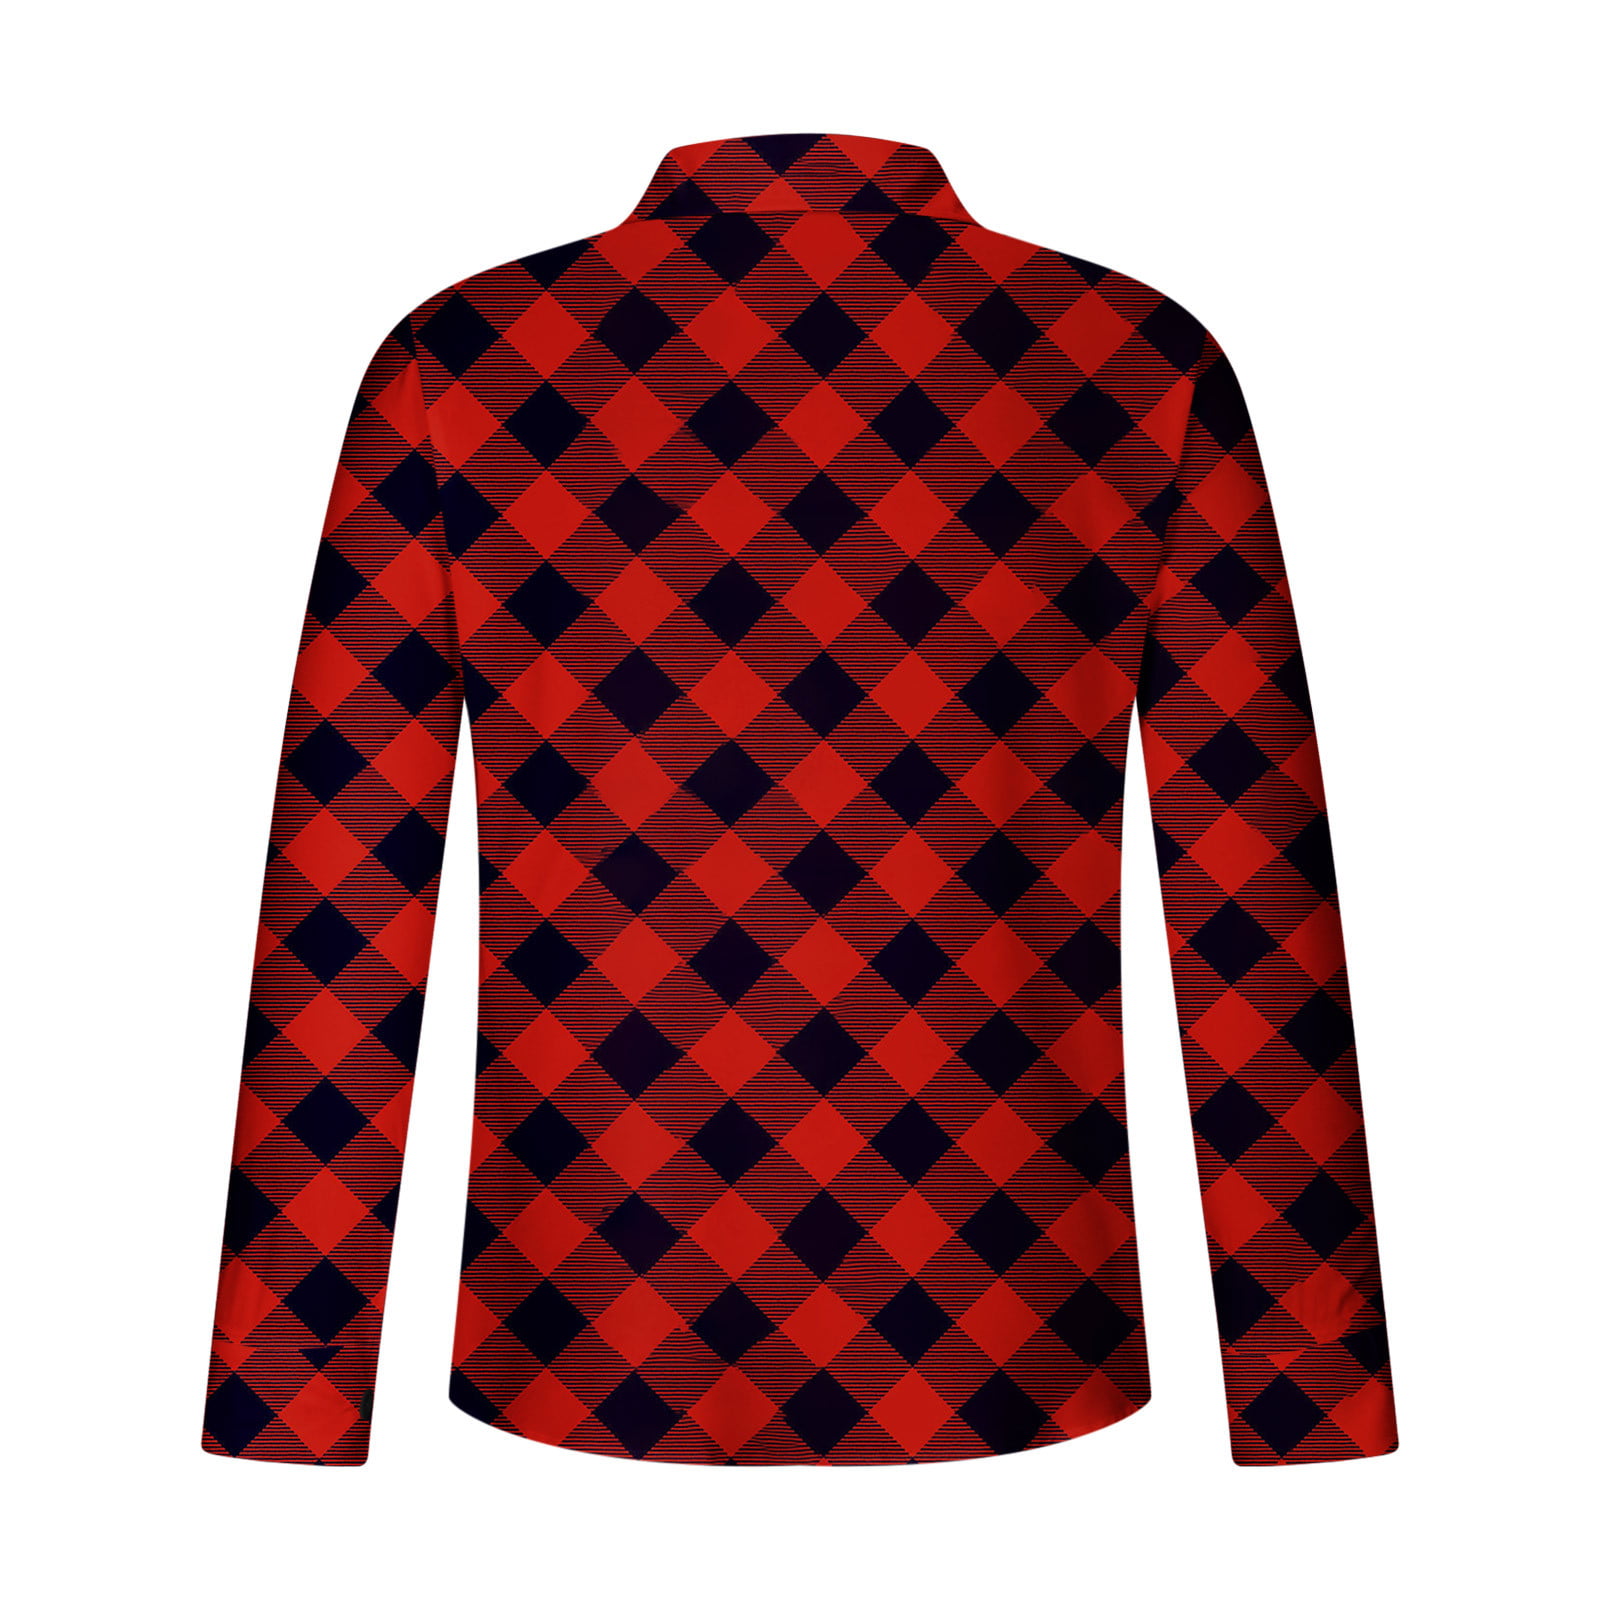 ZCFZJW Men's Long Sleeve Button Up Dress Shirts Christmas Buffalo Plaid  Graphic T Shirt Tops Holiday Party Leisure T-Shirts Red XL